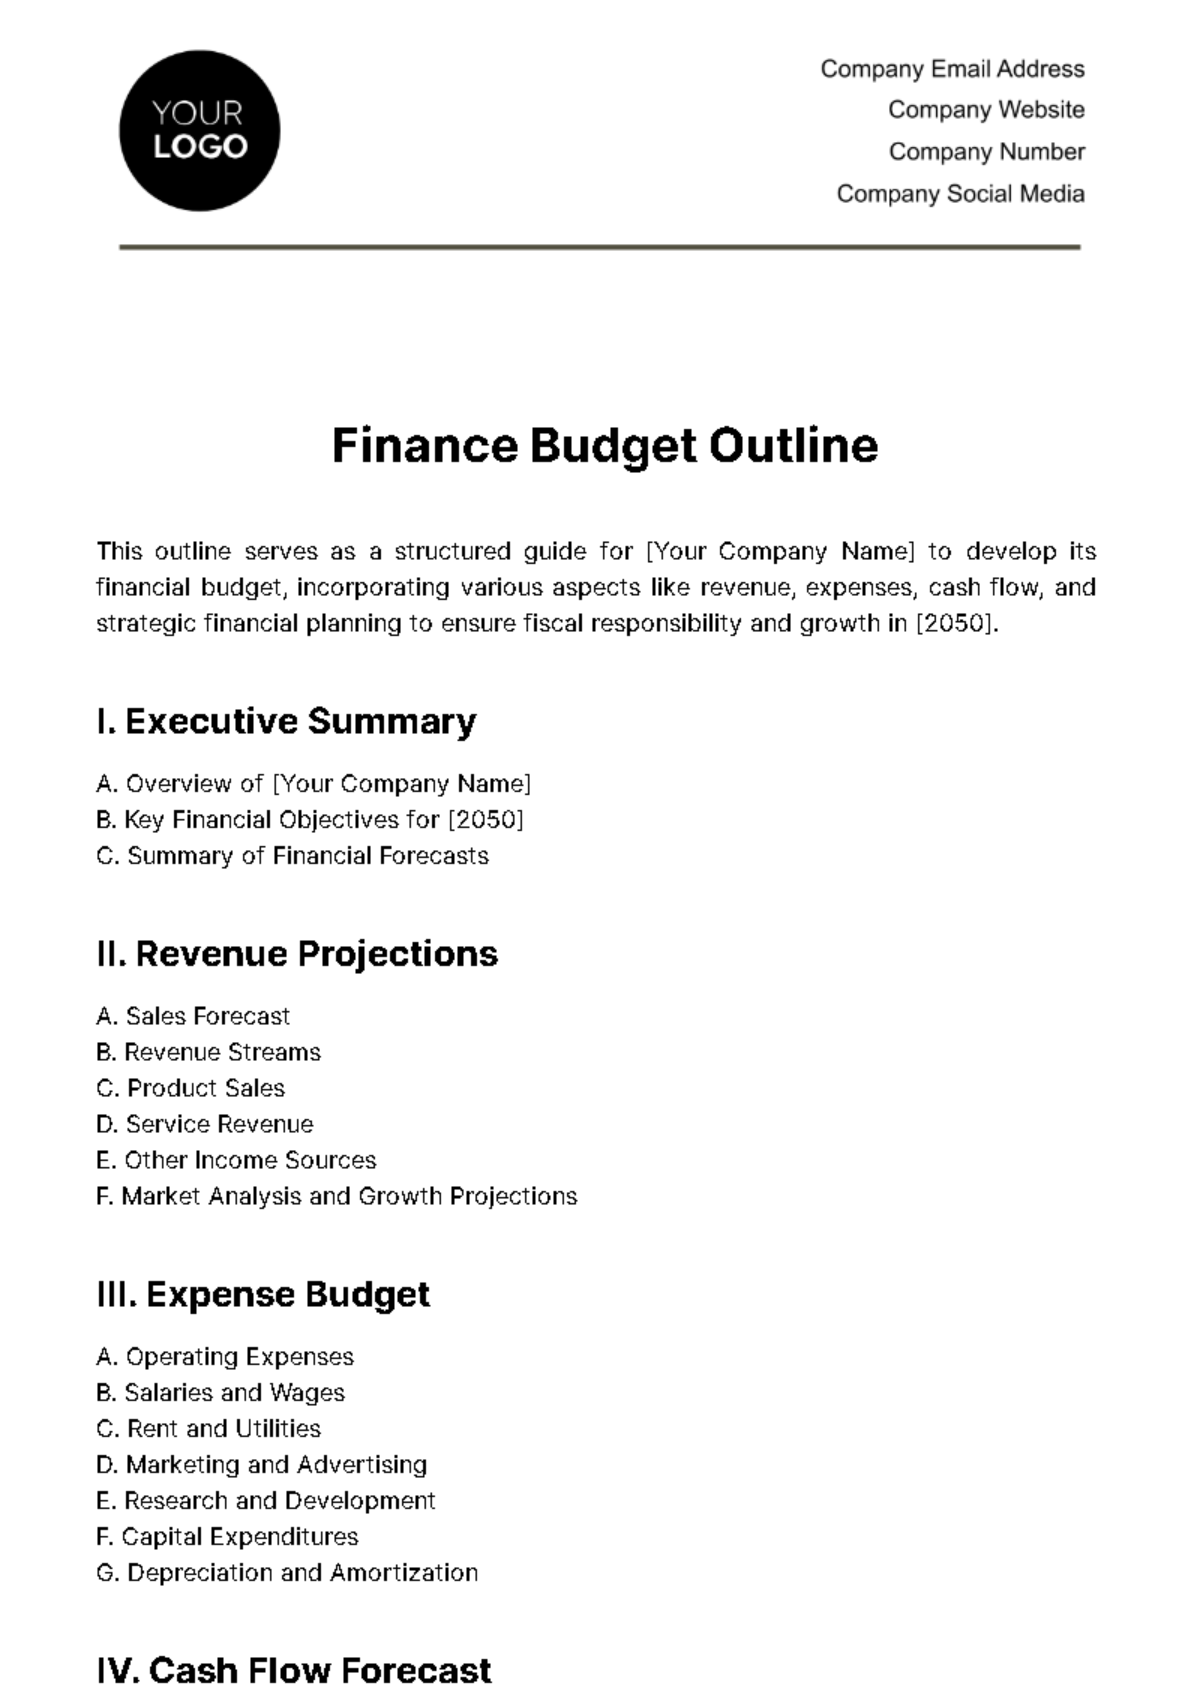 Finance Budget Outline Template